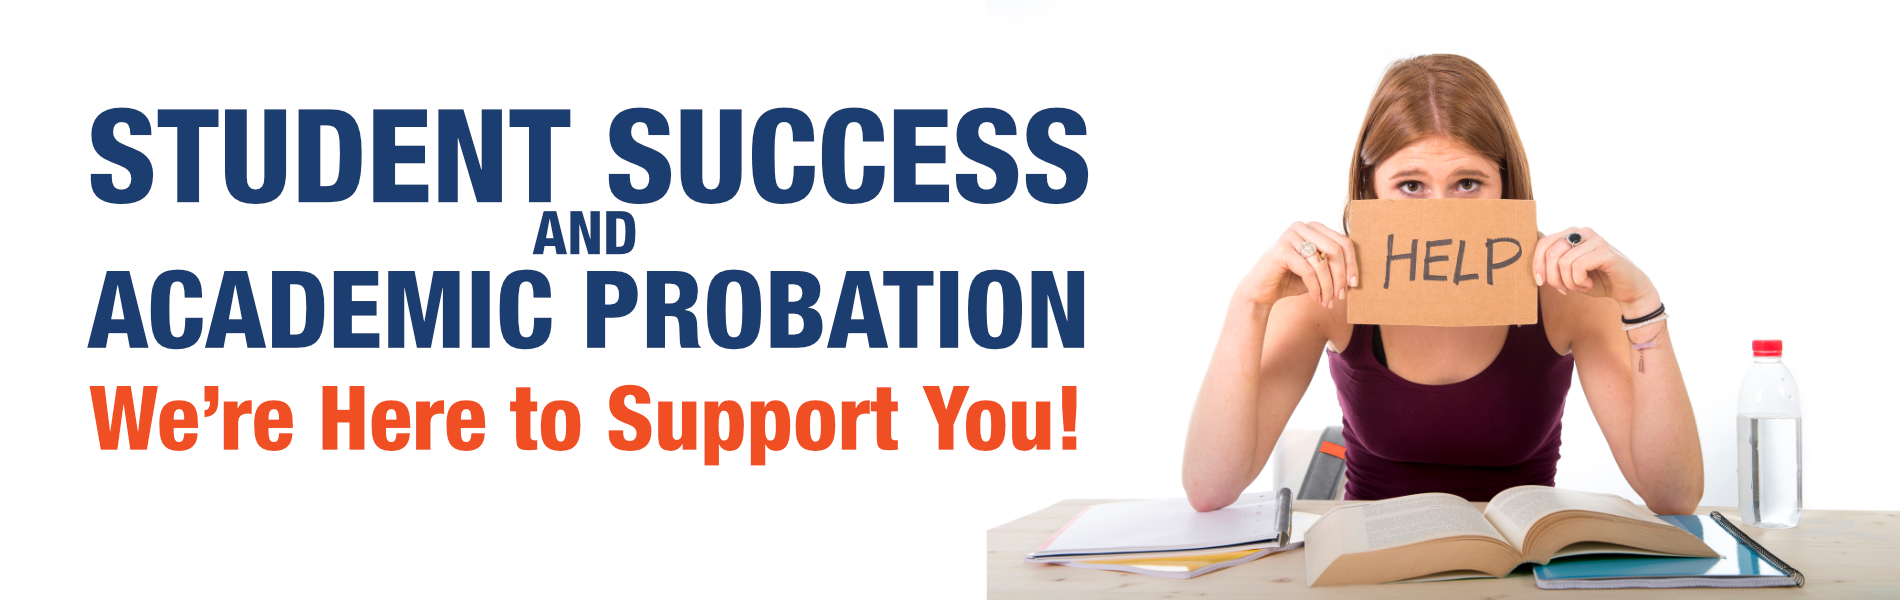 STUDENT SUCCESS and ACADEMIC PROBATION We’re Here to Support You!